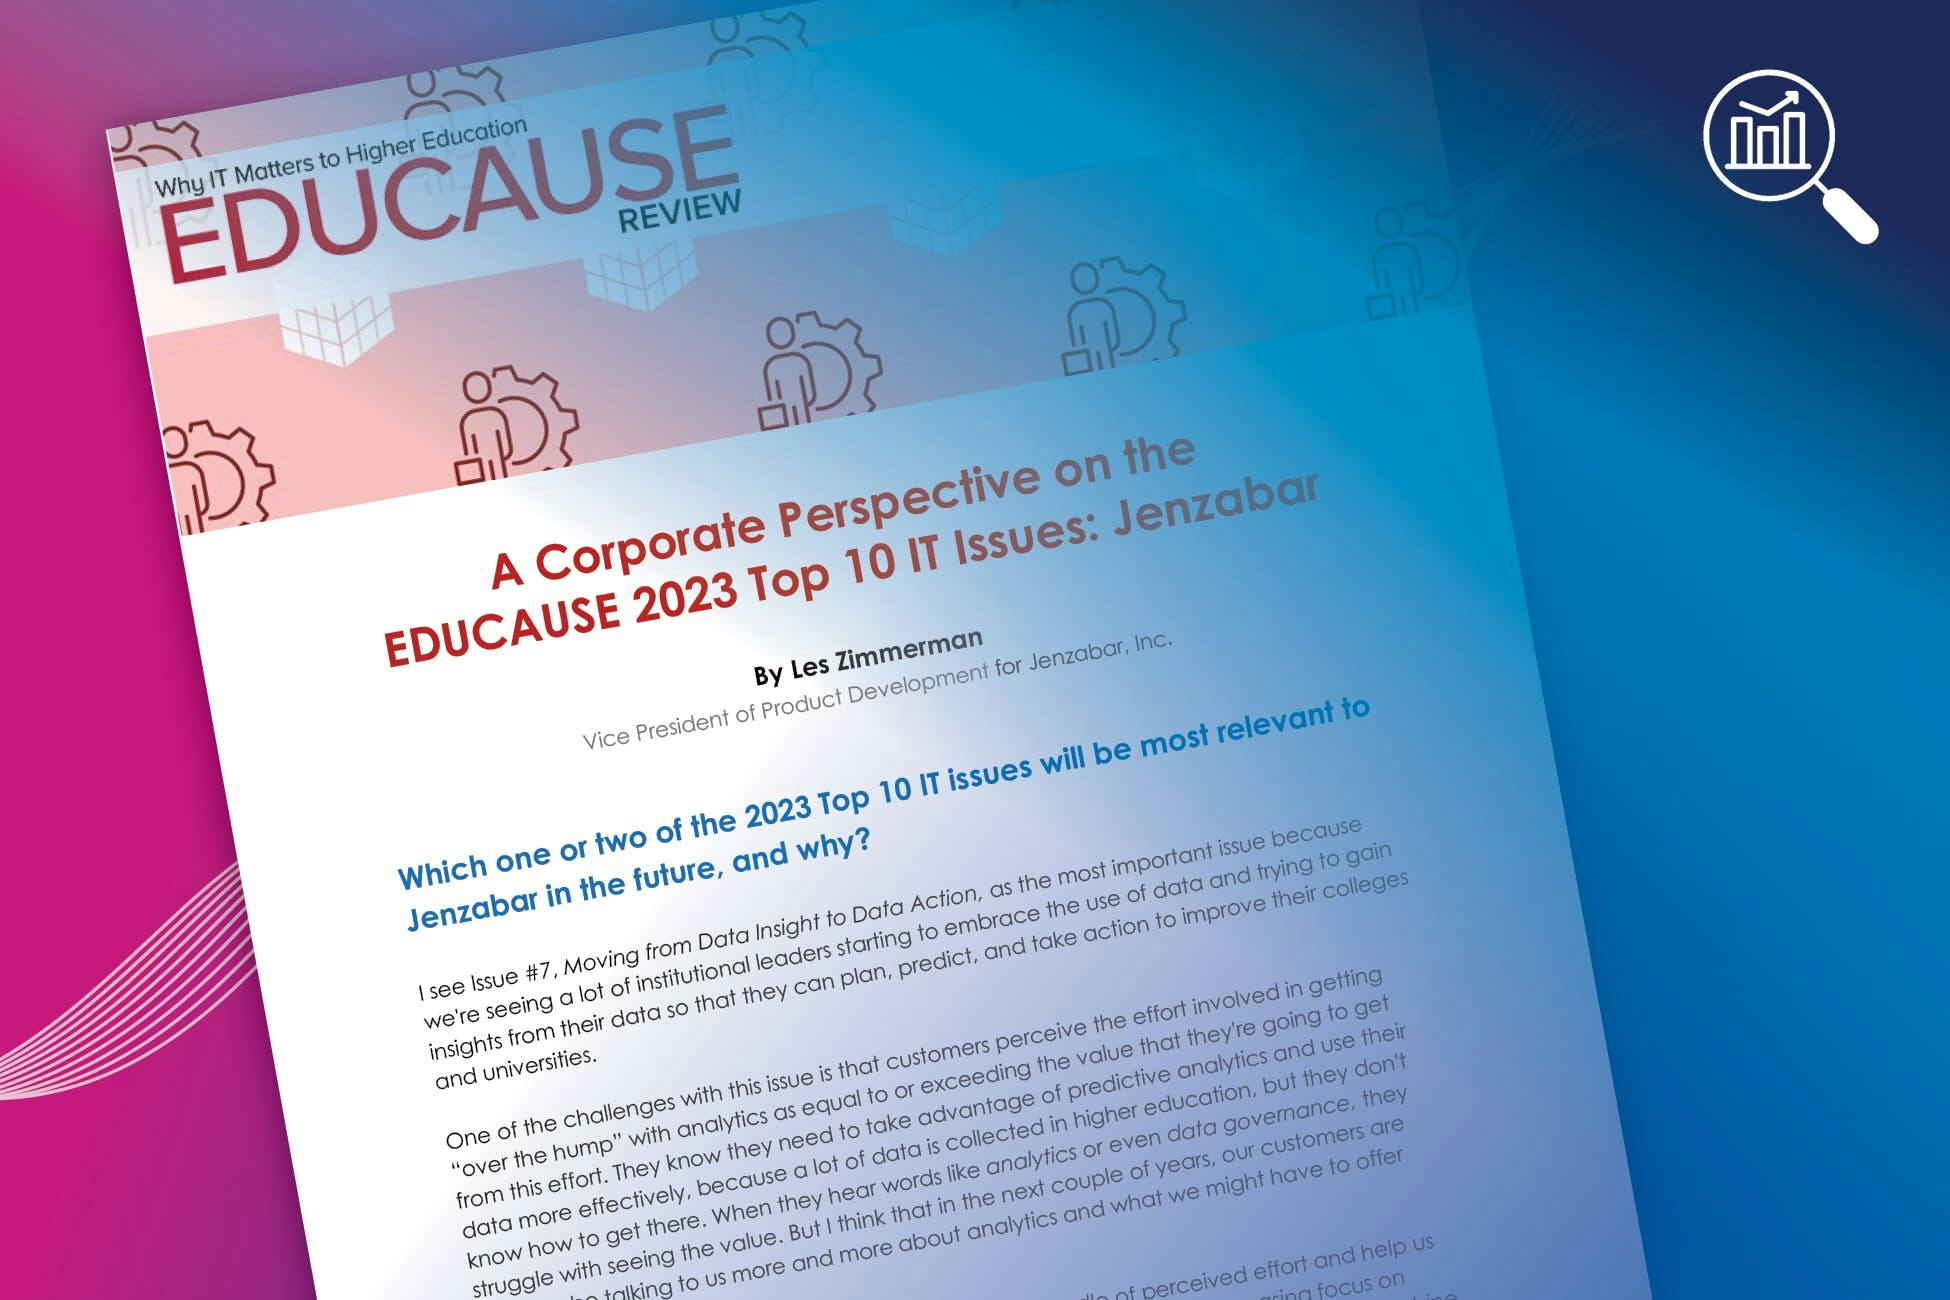 Industry Insight: Jenzabar's Perspective on the EDUCAUSE 2023 Top 10 IT Issues